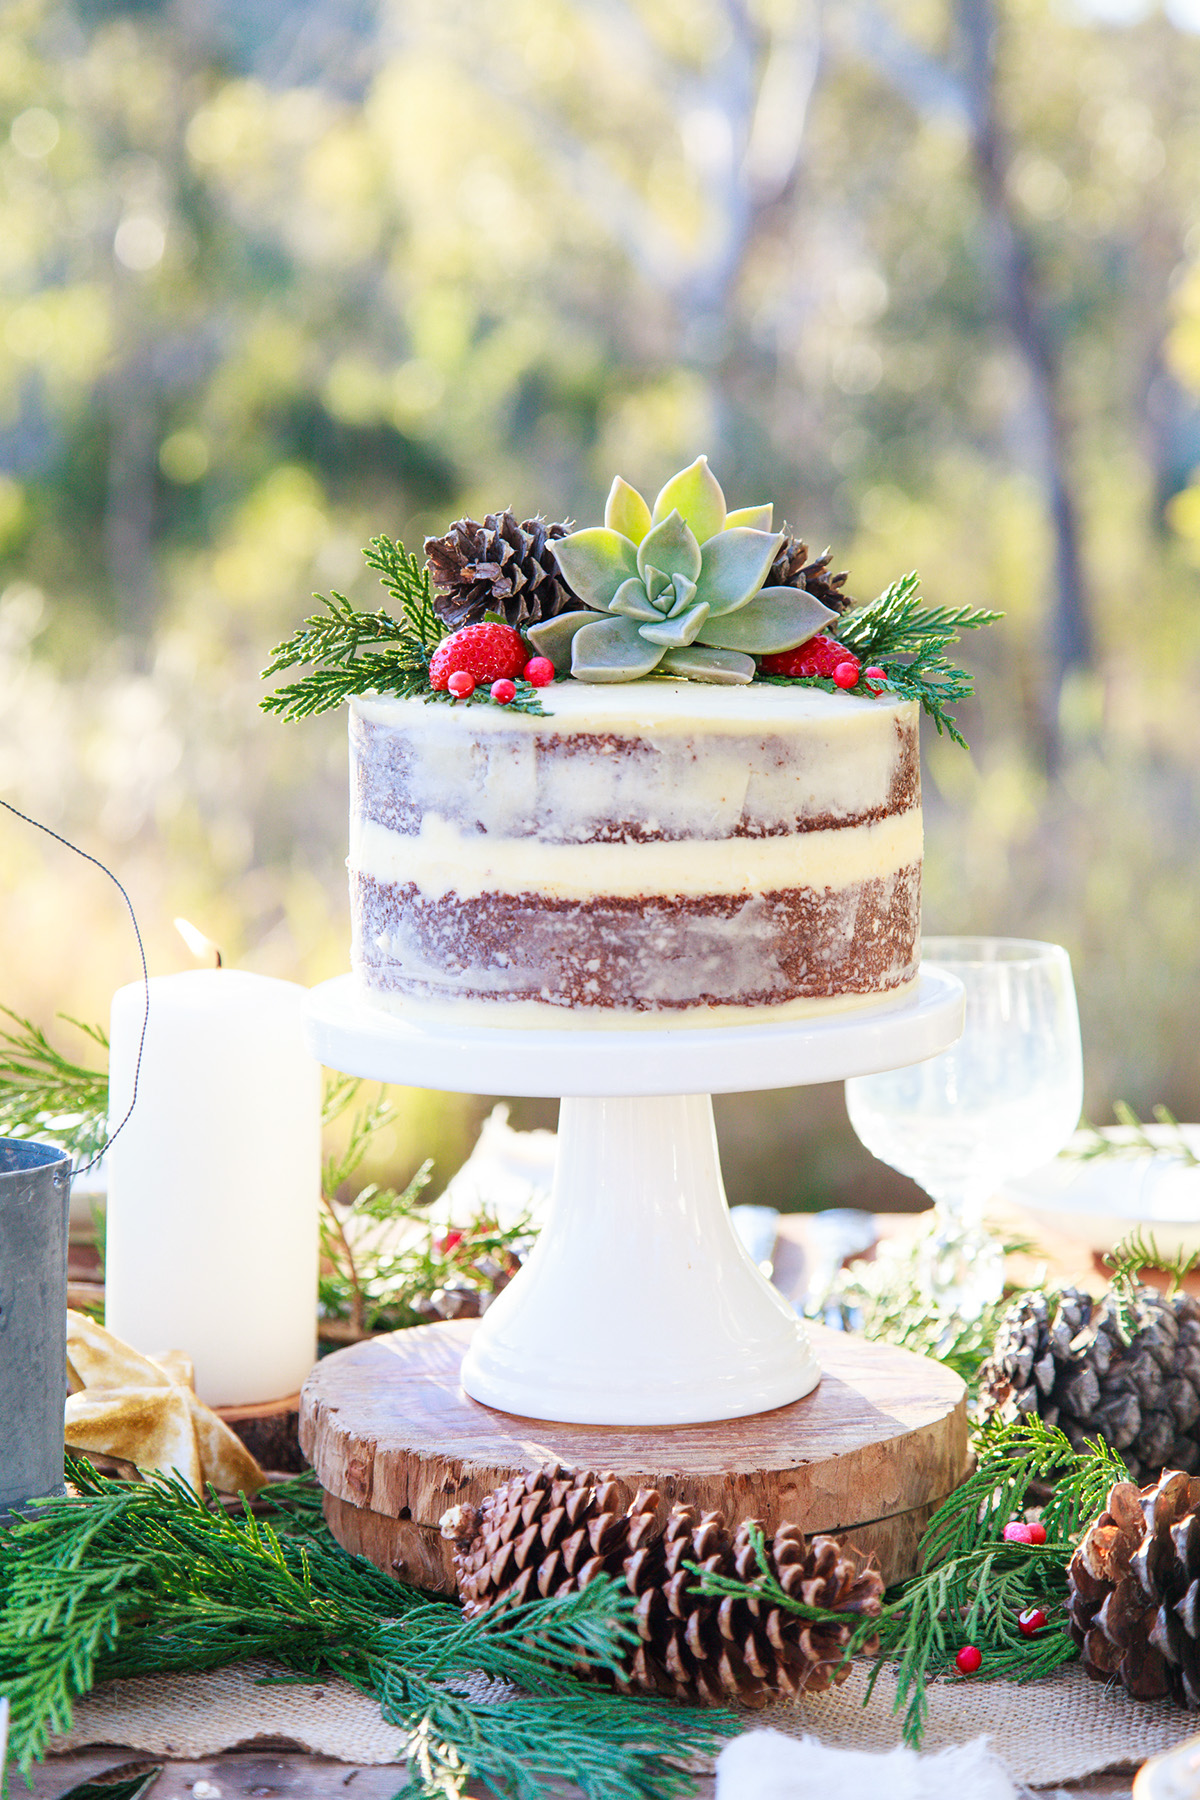 rustic Christmas tablescape Outdoor Paddock wedding Naked Cake natural setting